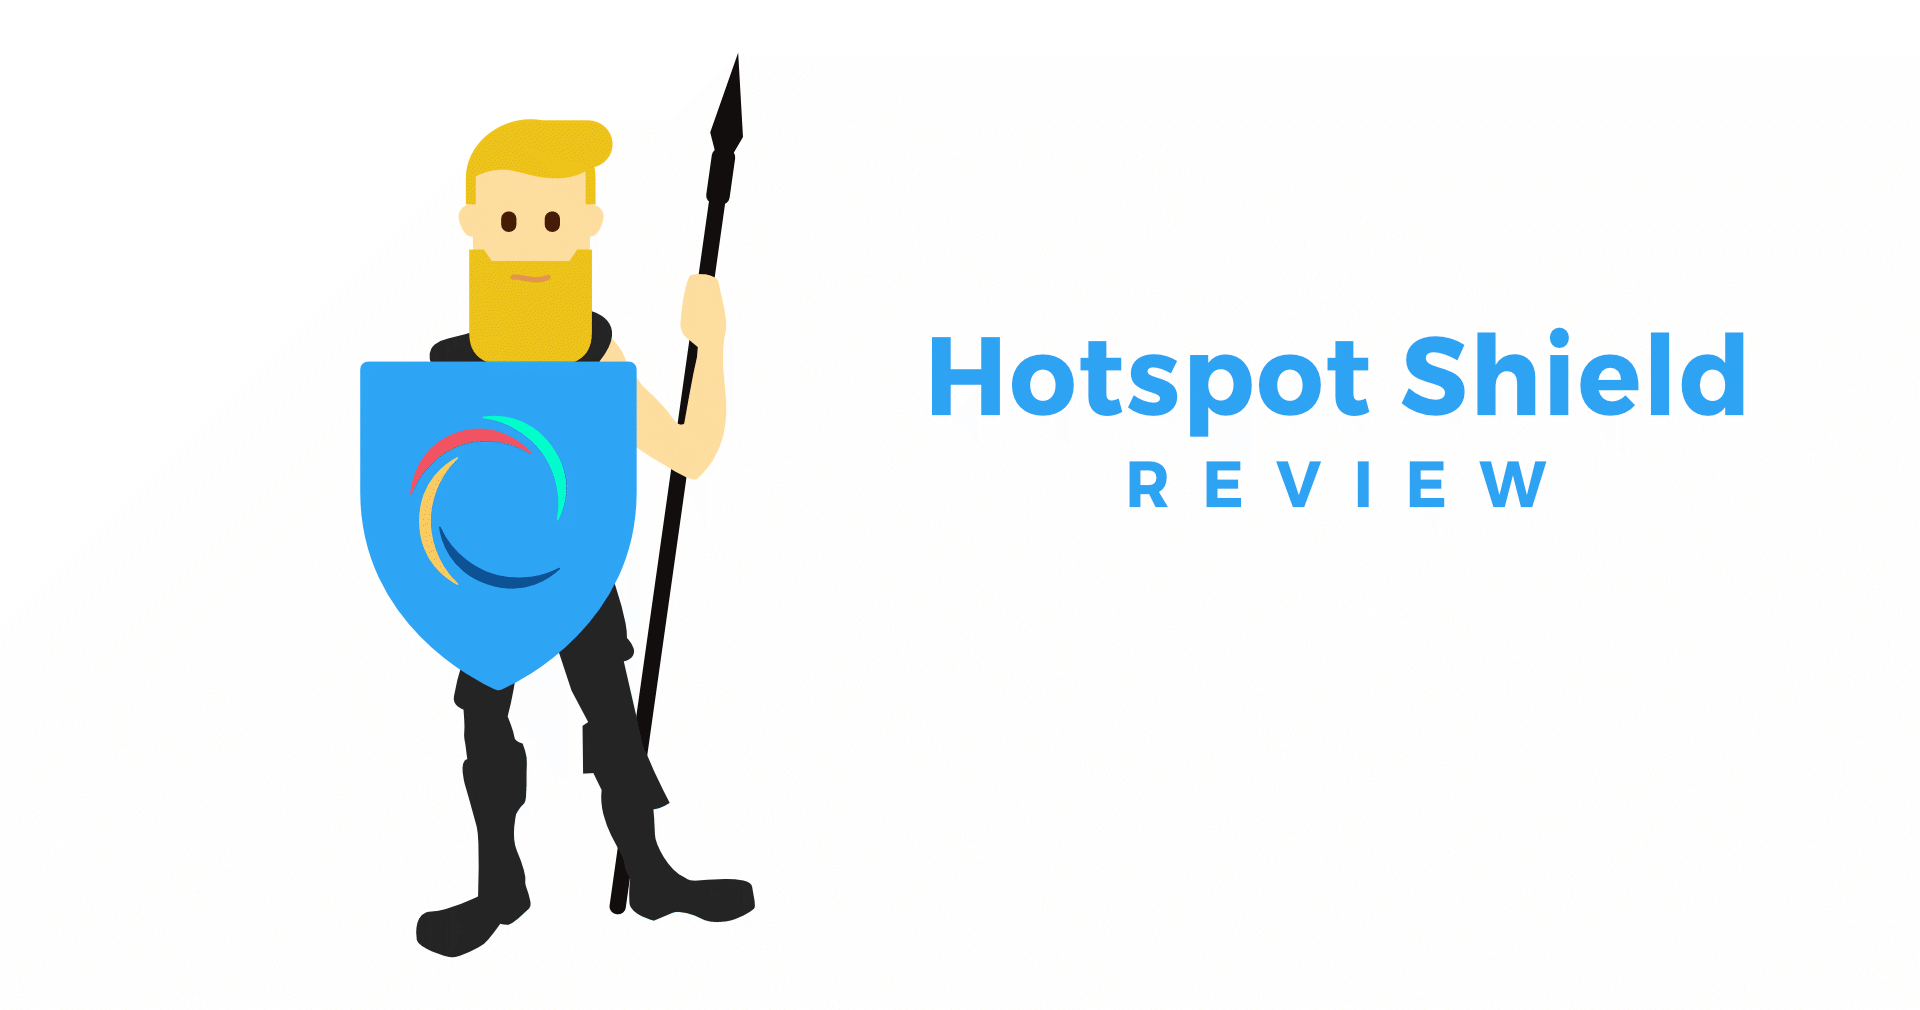 Hotspot Shield Review – What Should You Believe?